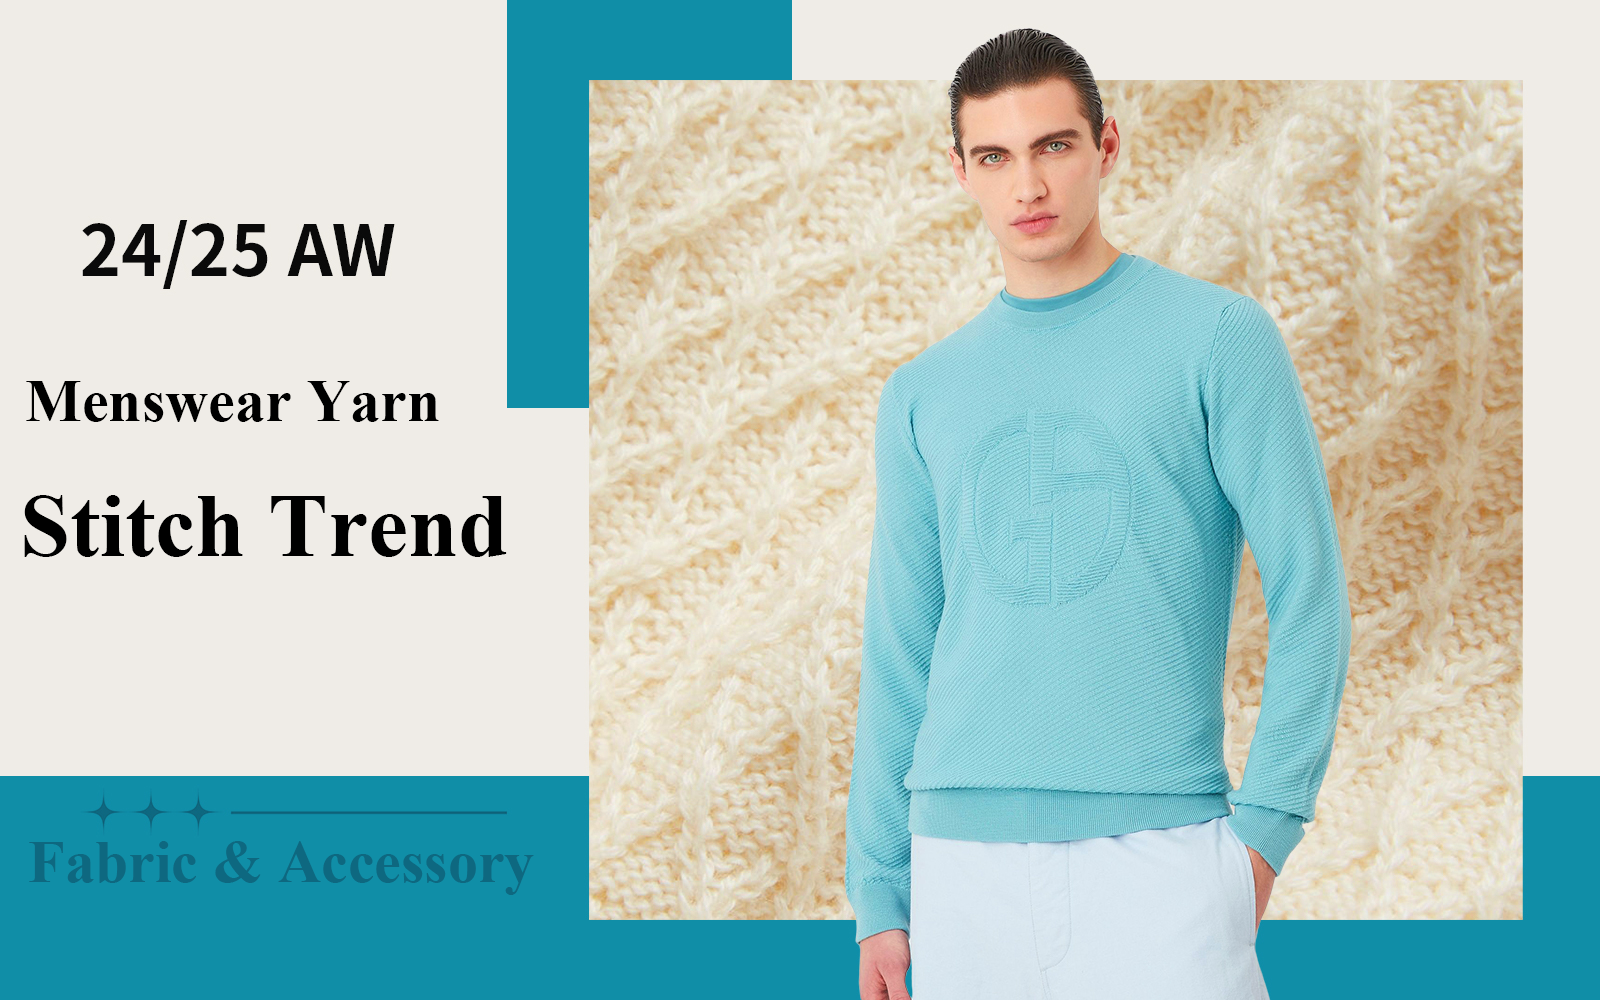 Stitched Texture -- The Stitch Trend for Men's Knitwear